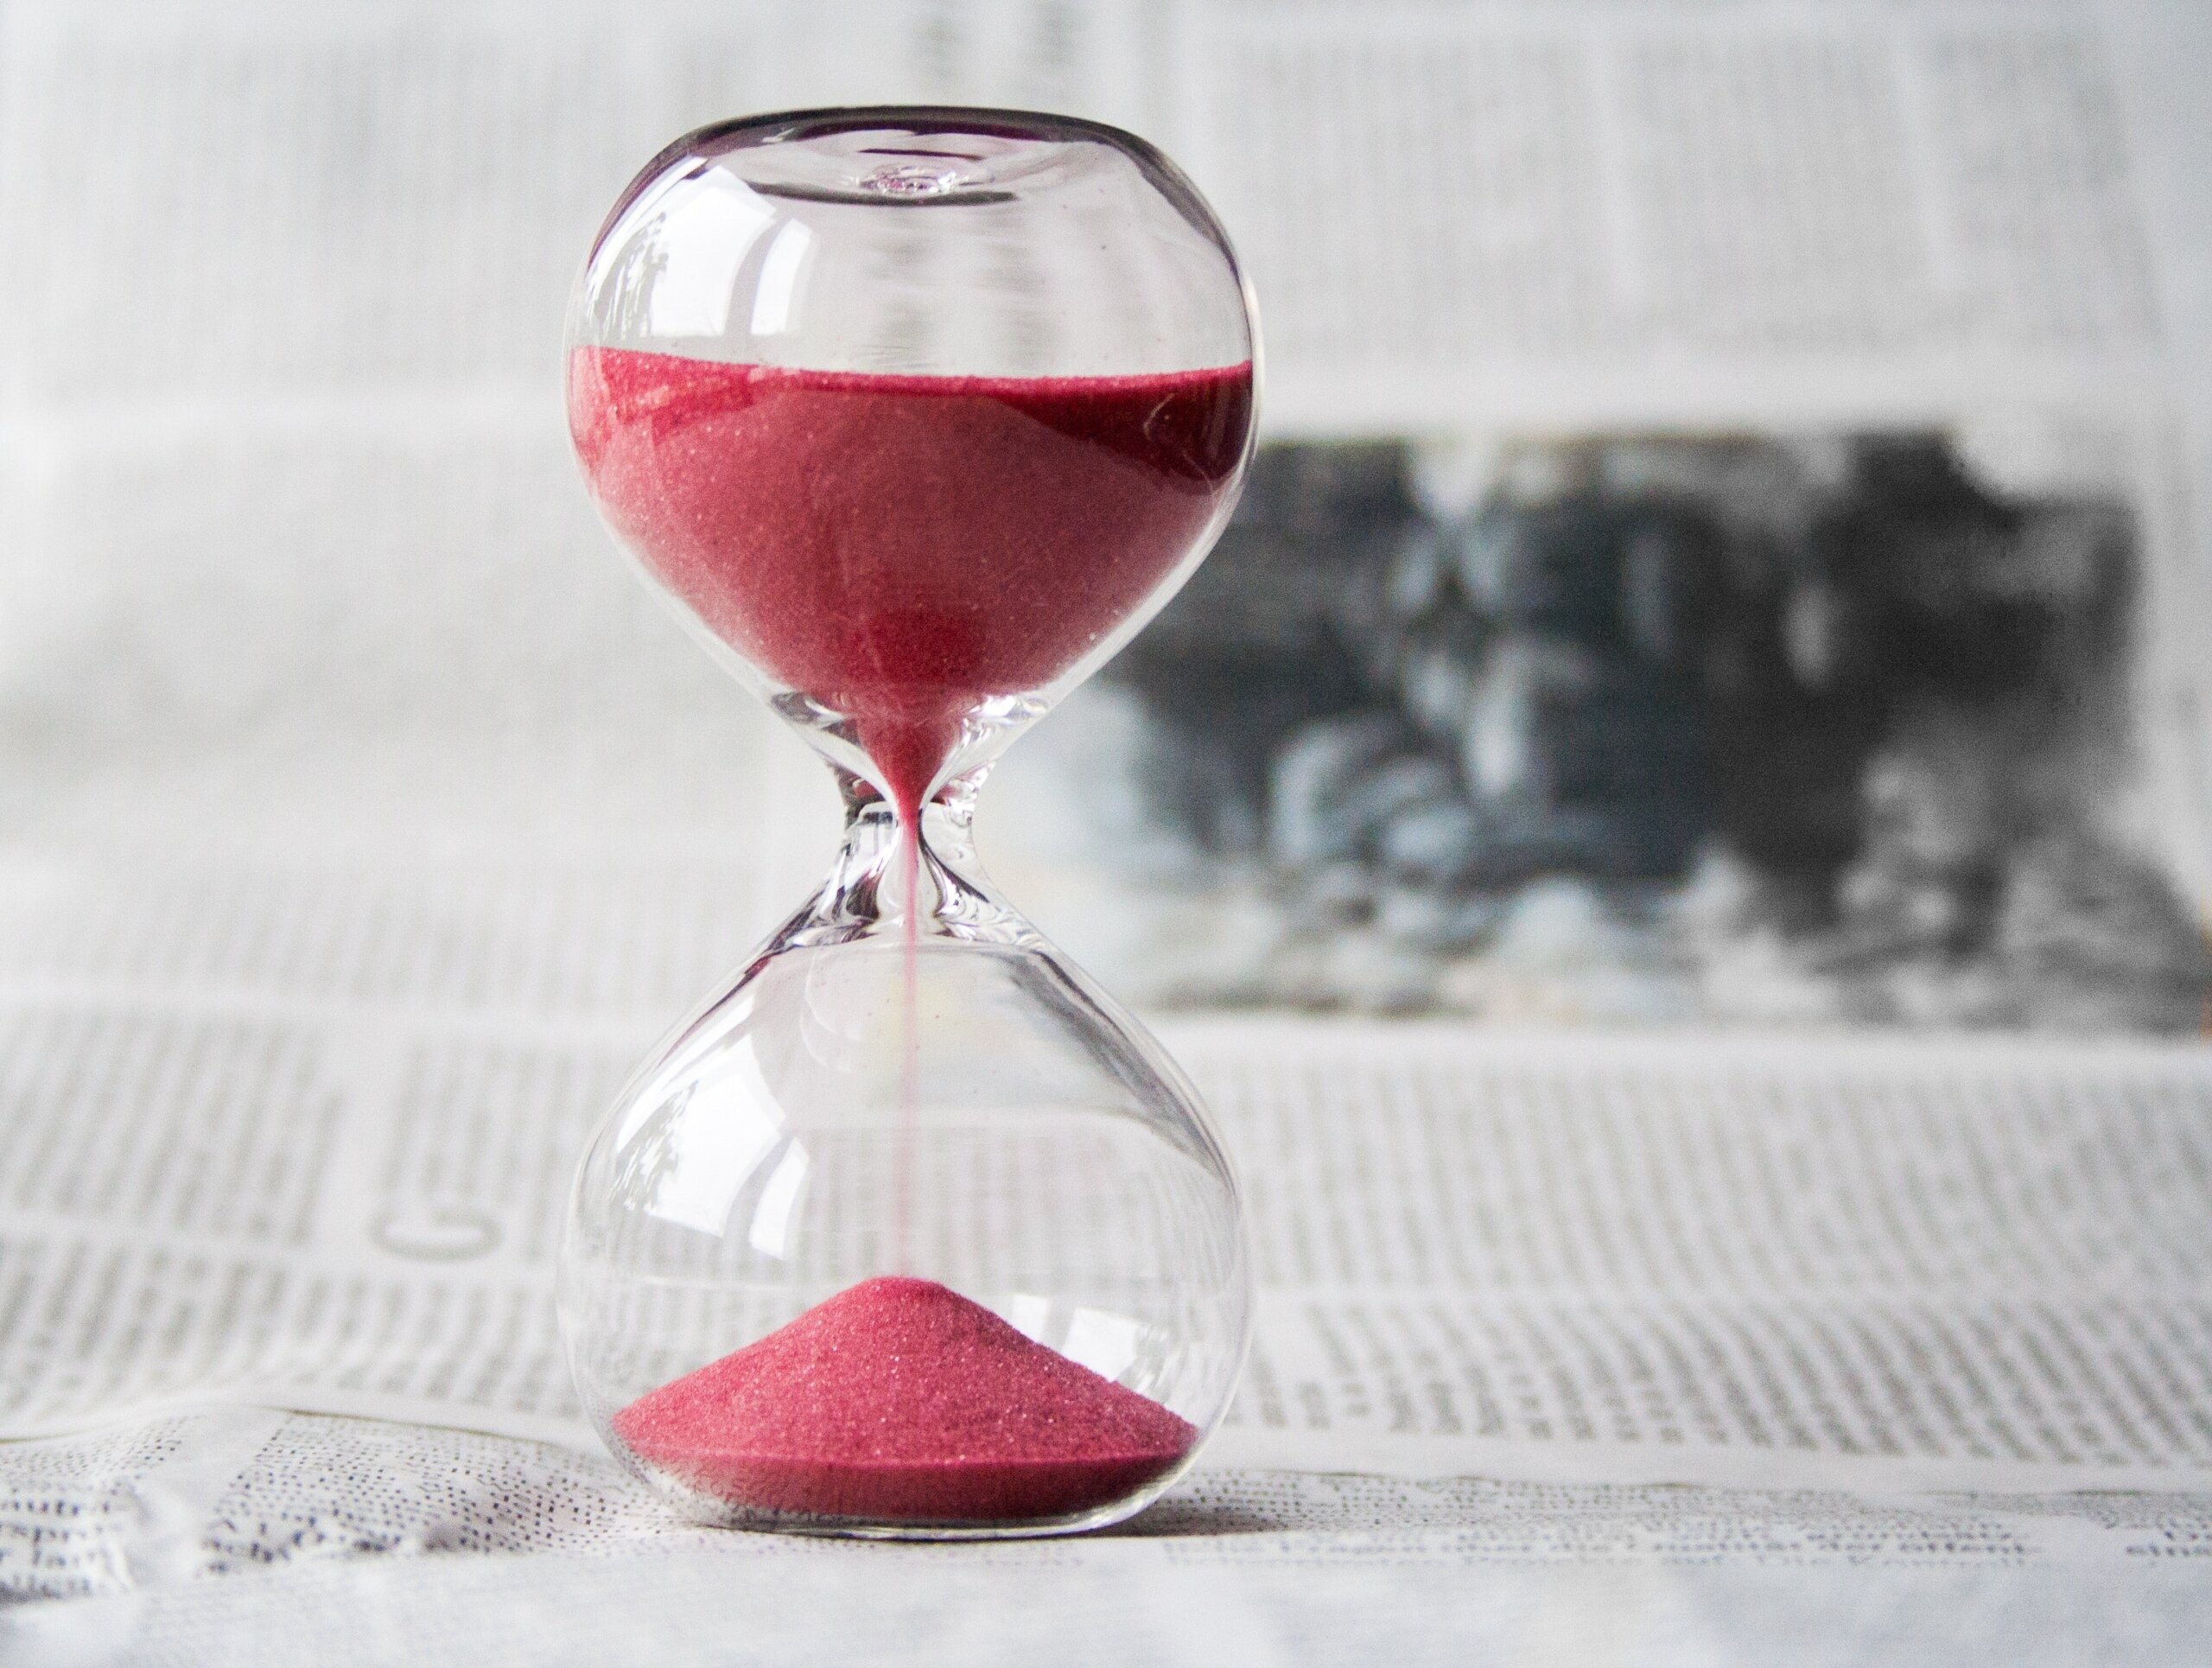 Saving time by enabling faster access to full-text research articles